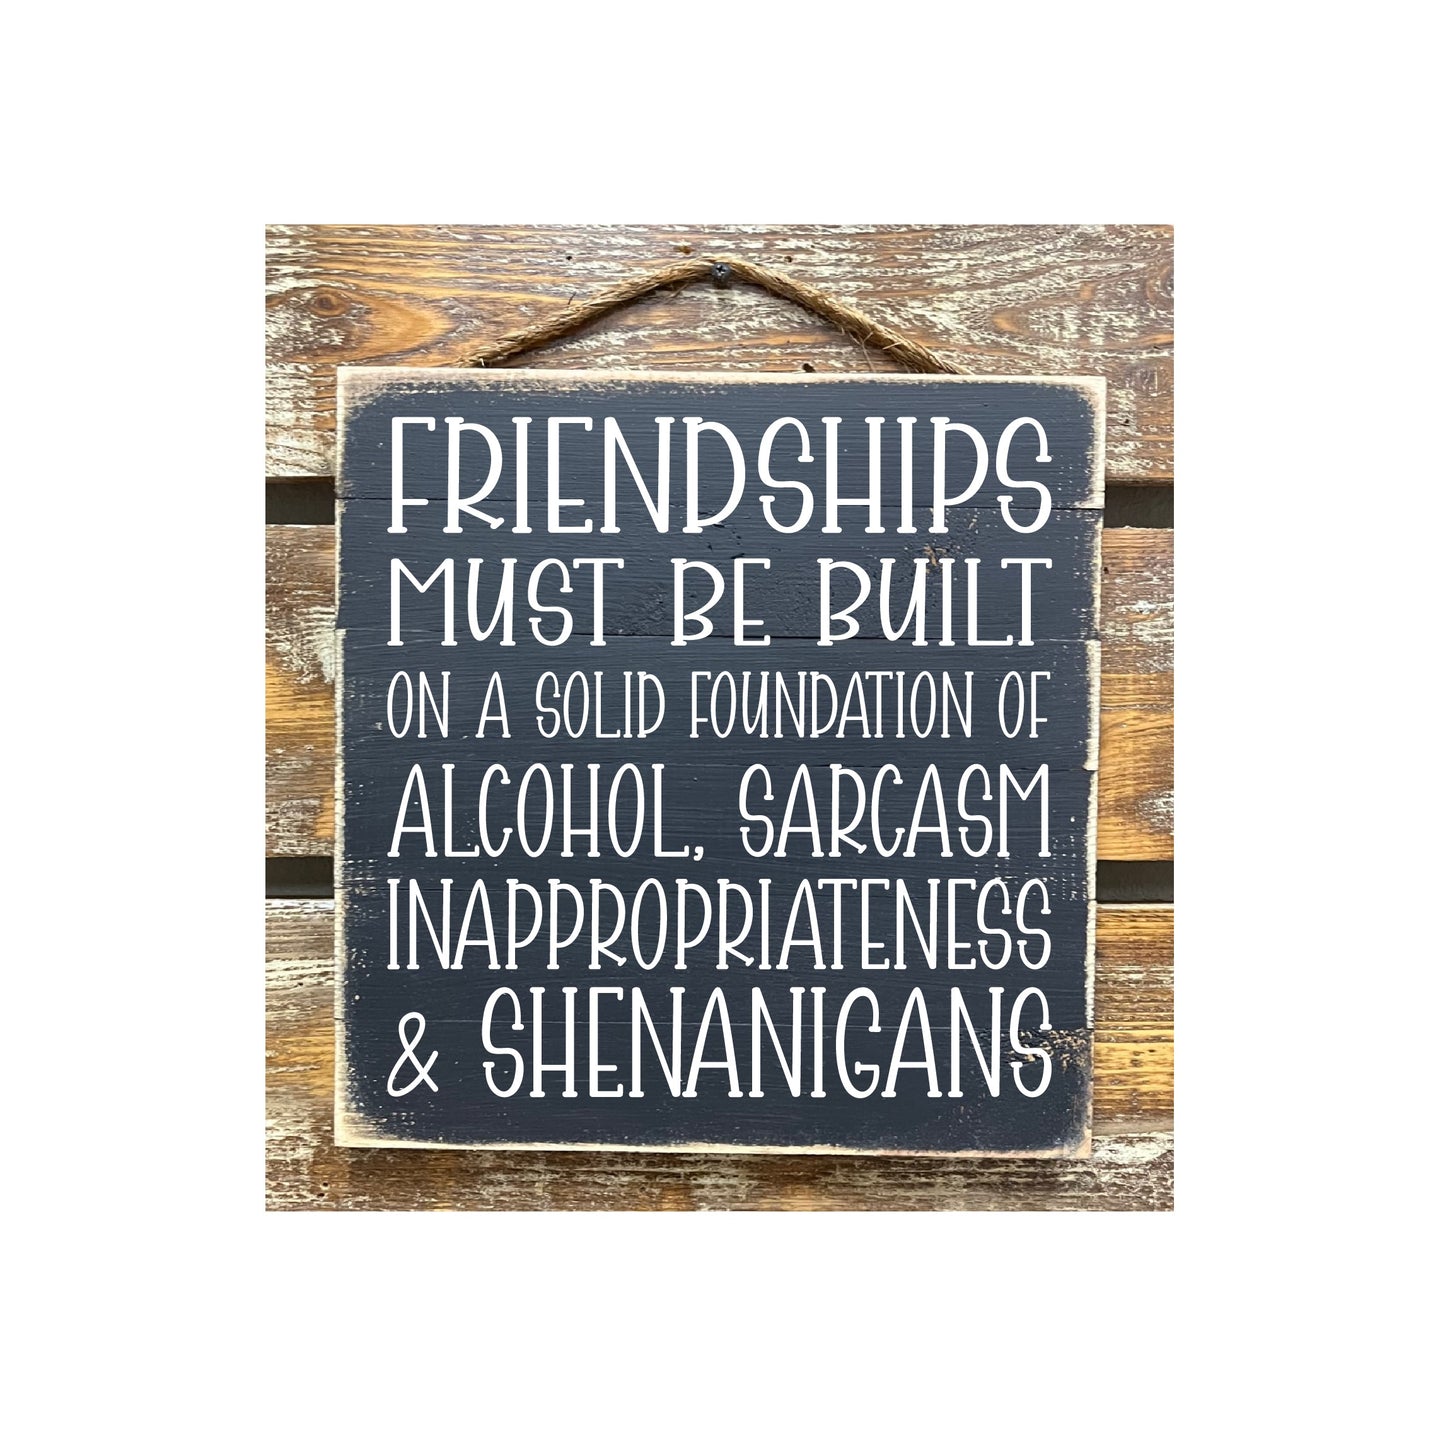 Friendships Must Be Built On A Solid Foundation...